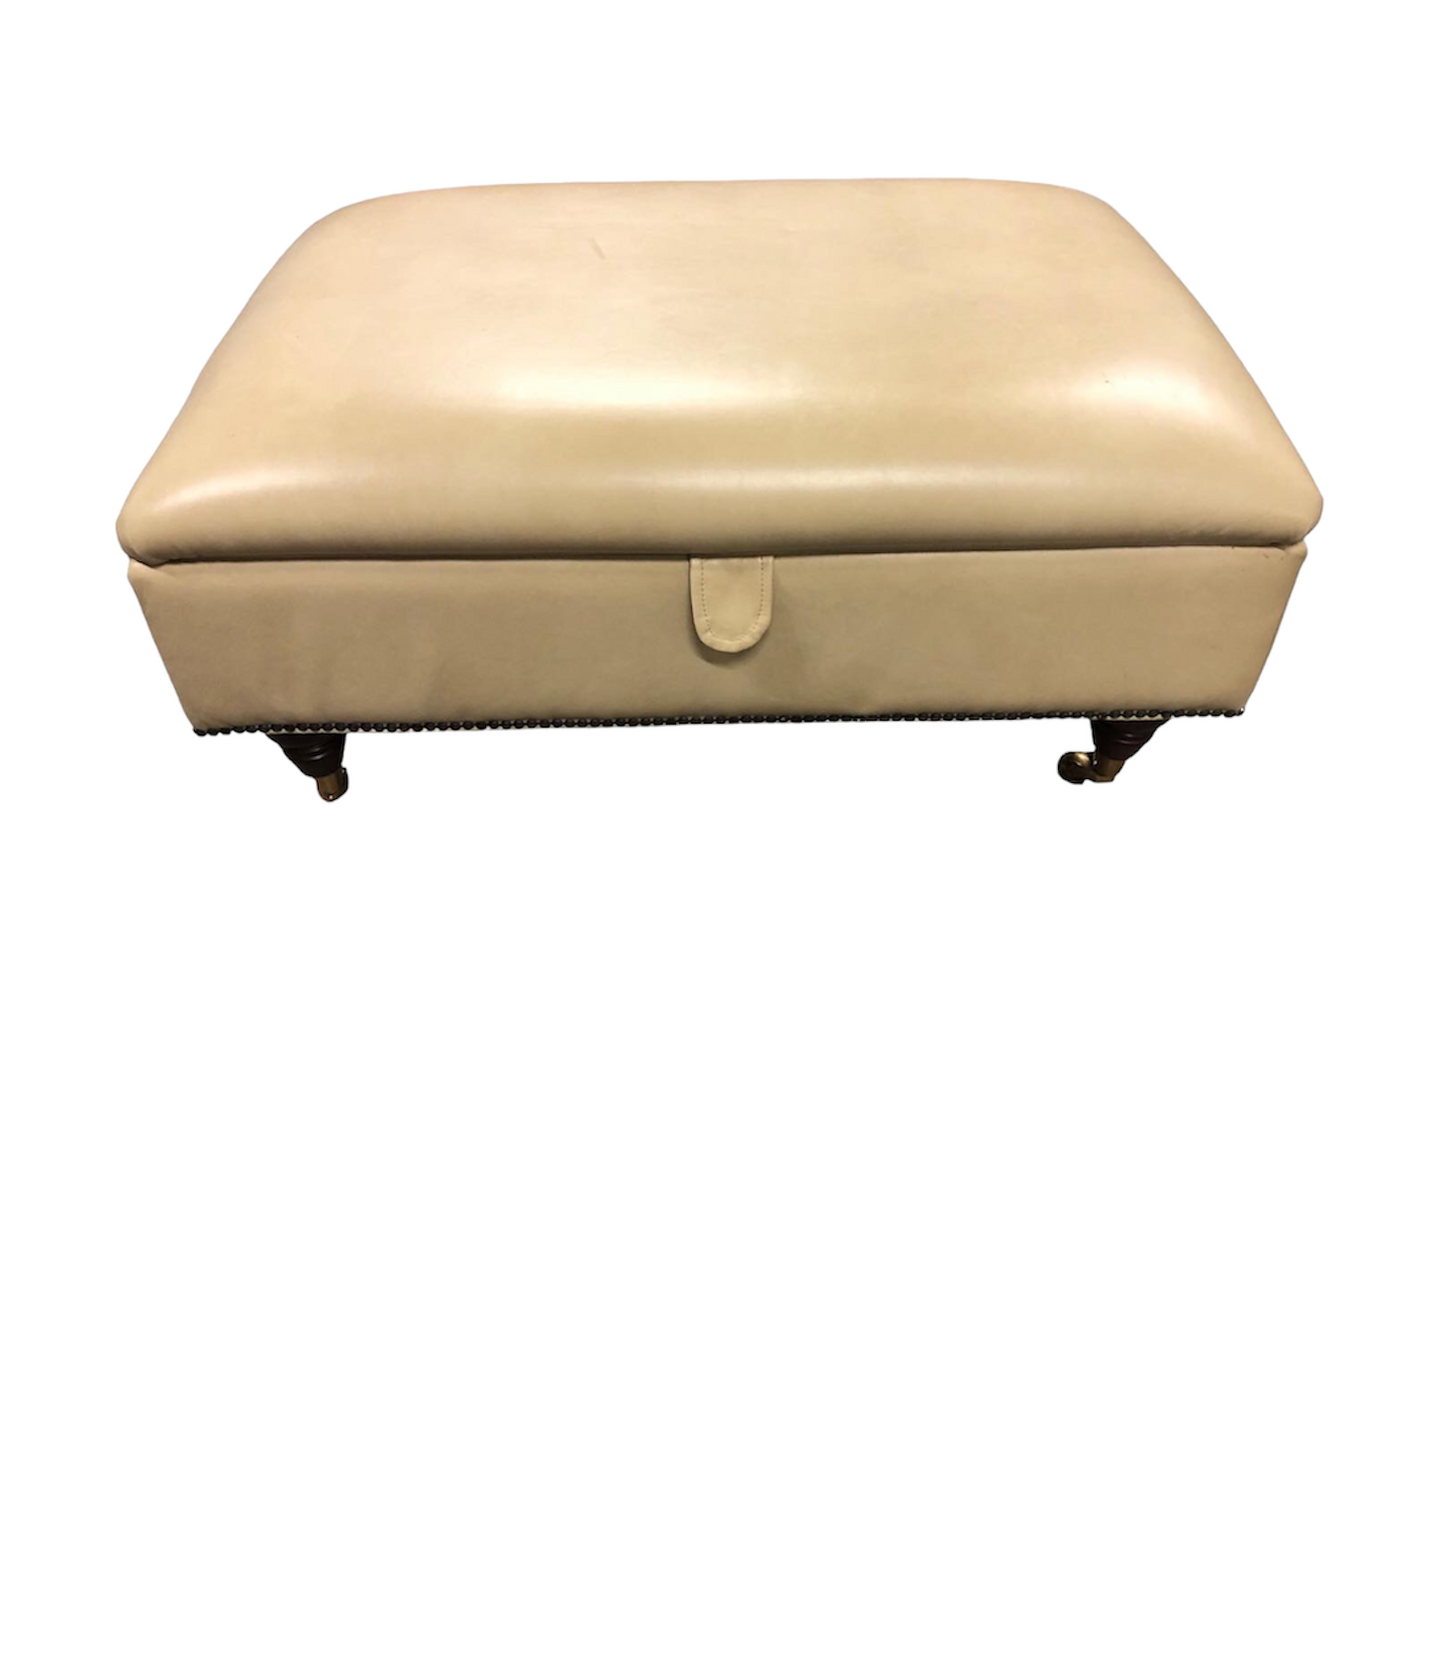 000892....Handsome Large Cream Leather Stool